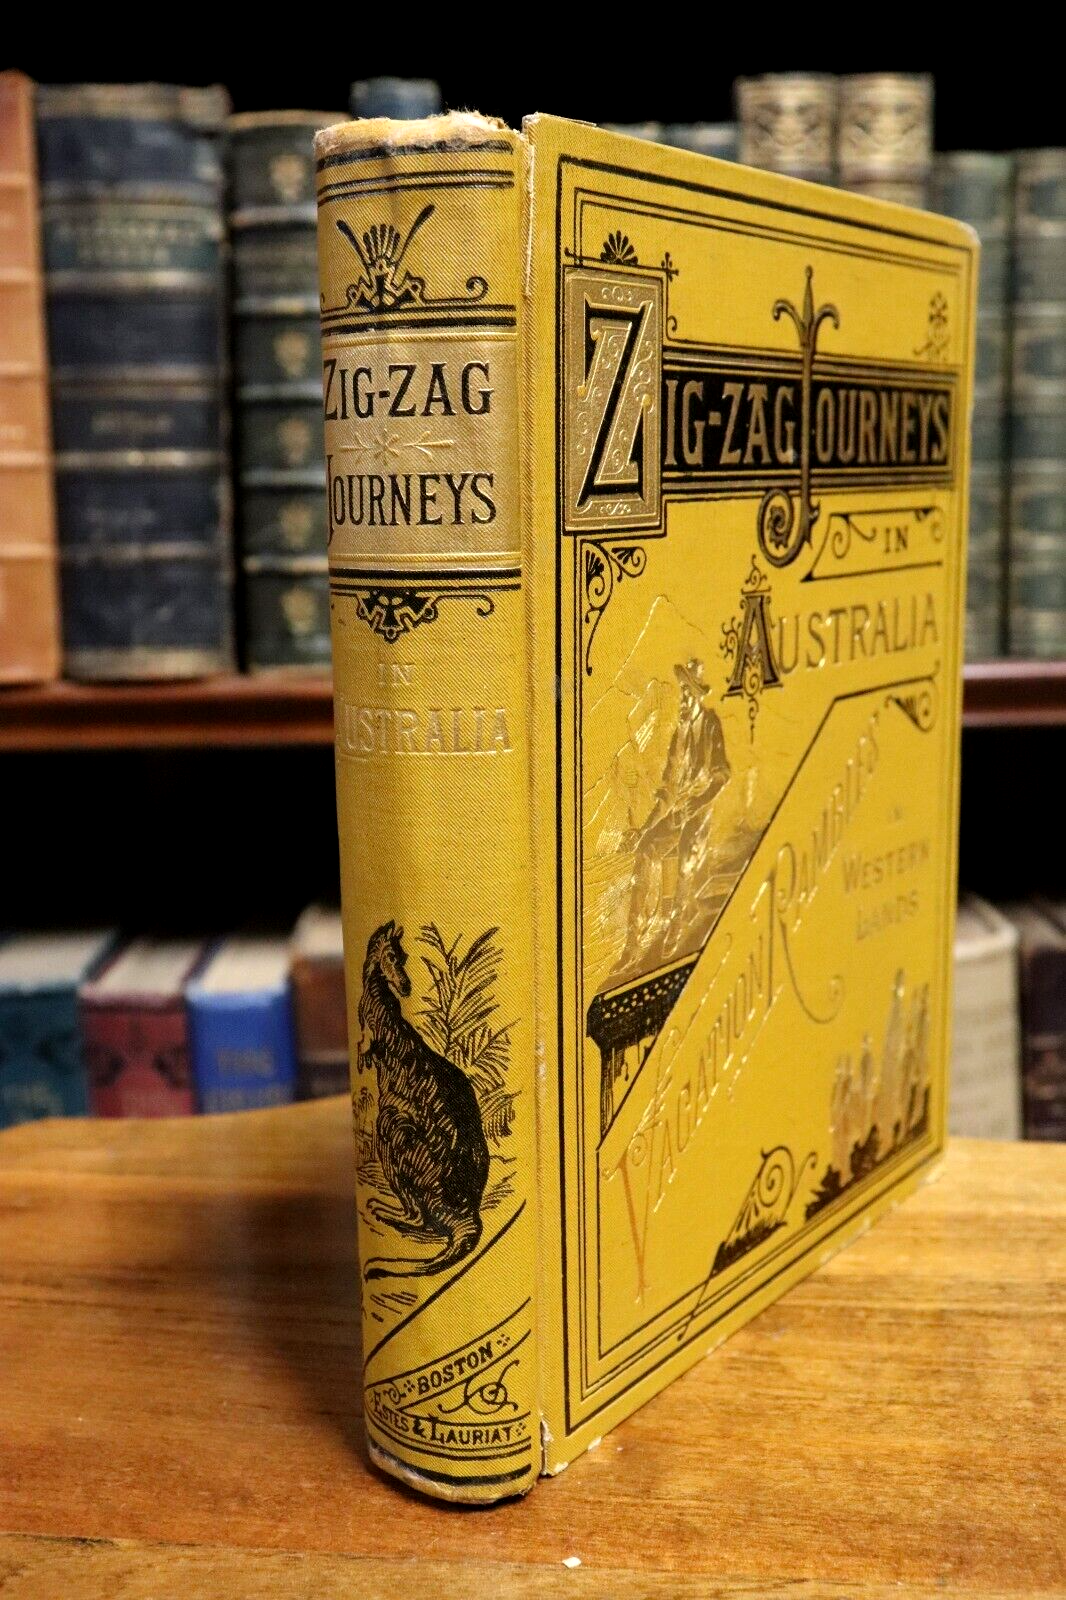 1891 Zigzag Journeys In Australia by H Butterworth Antiquarian Illustrated Book